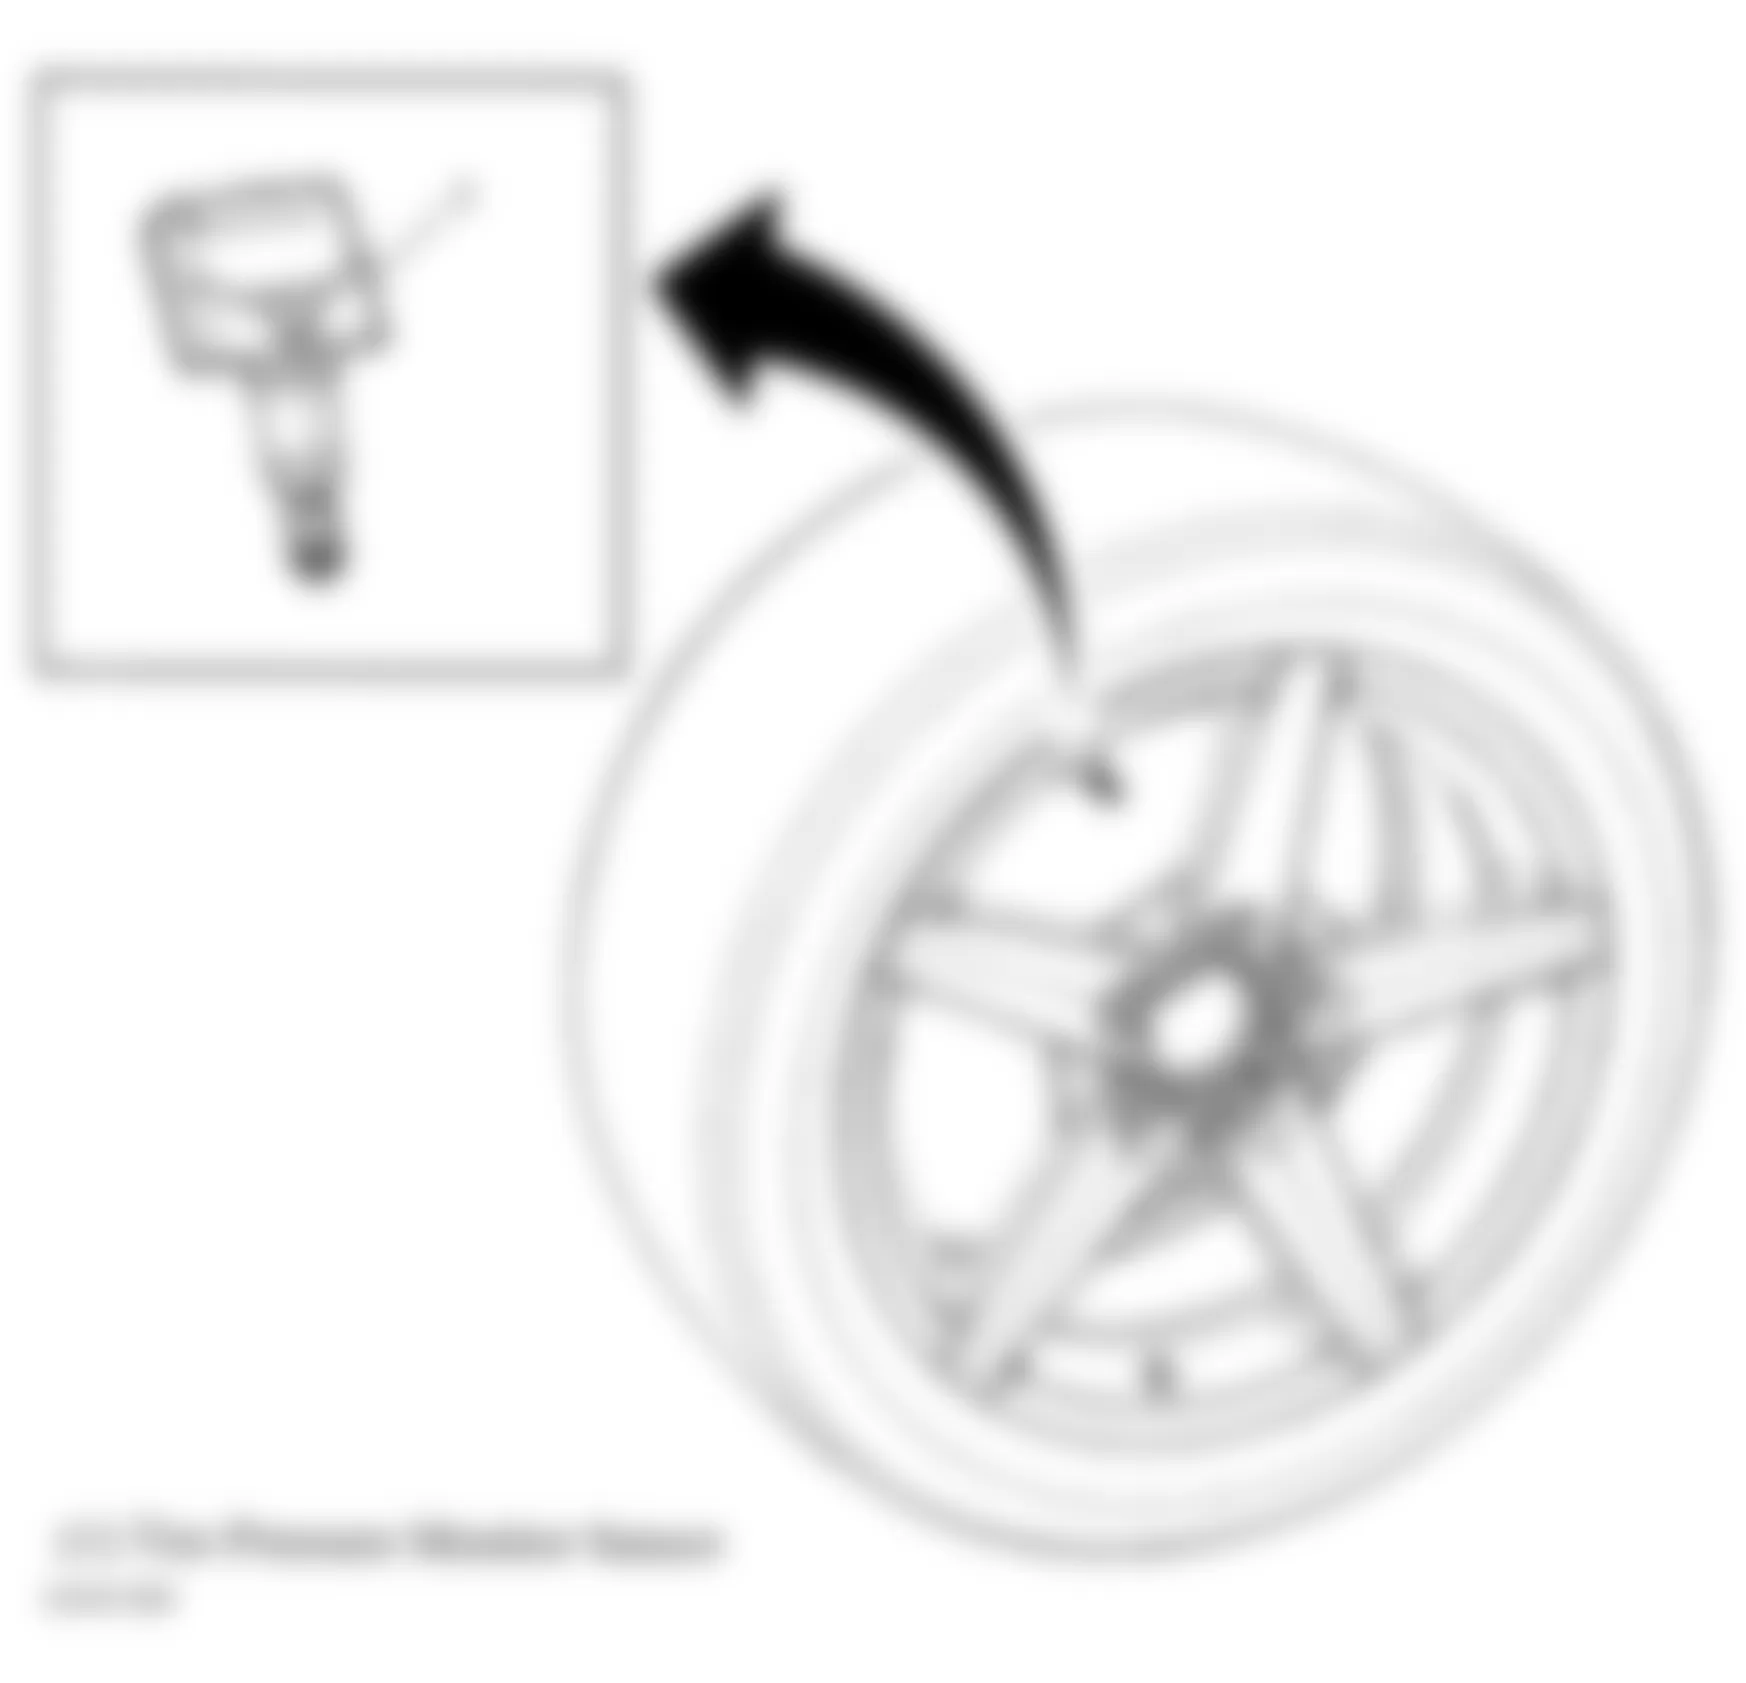 Chevrolet Impala LT 2006 - Component Locations -  Wheel Assembly